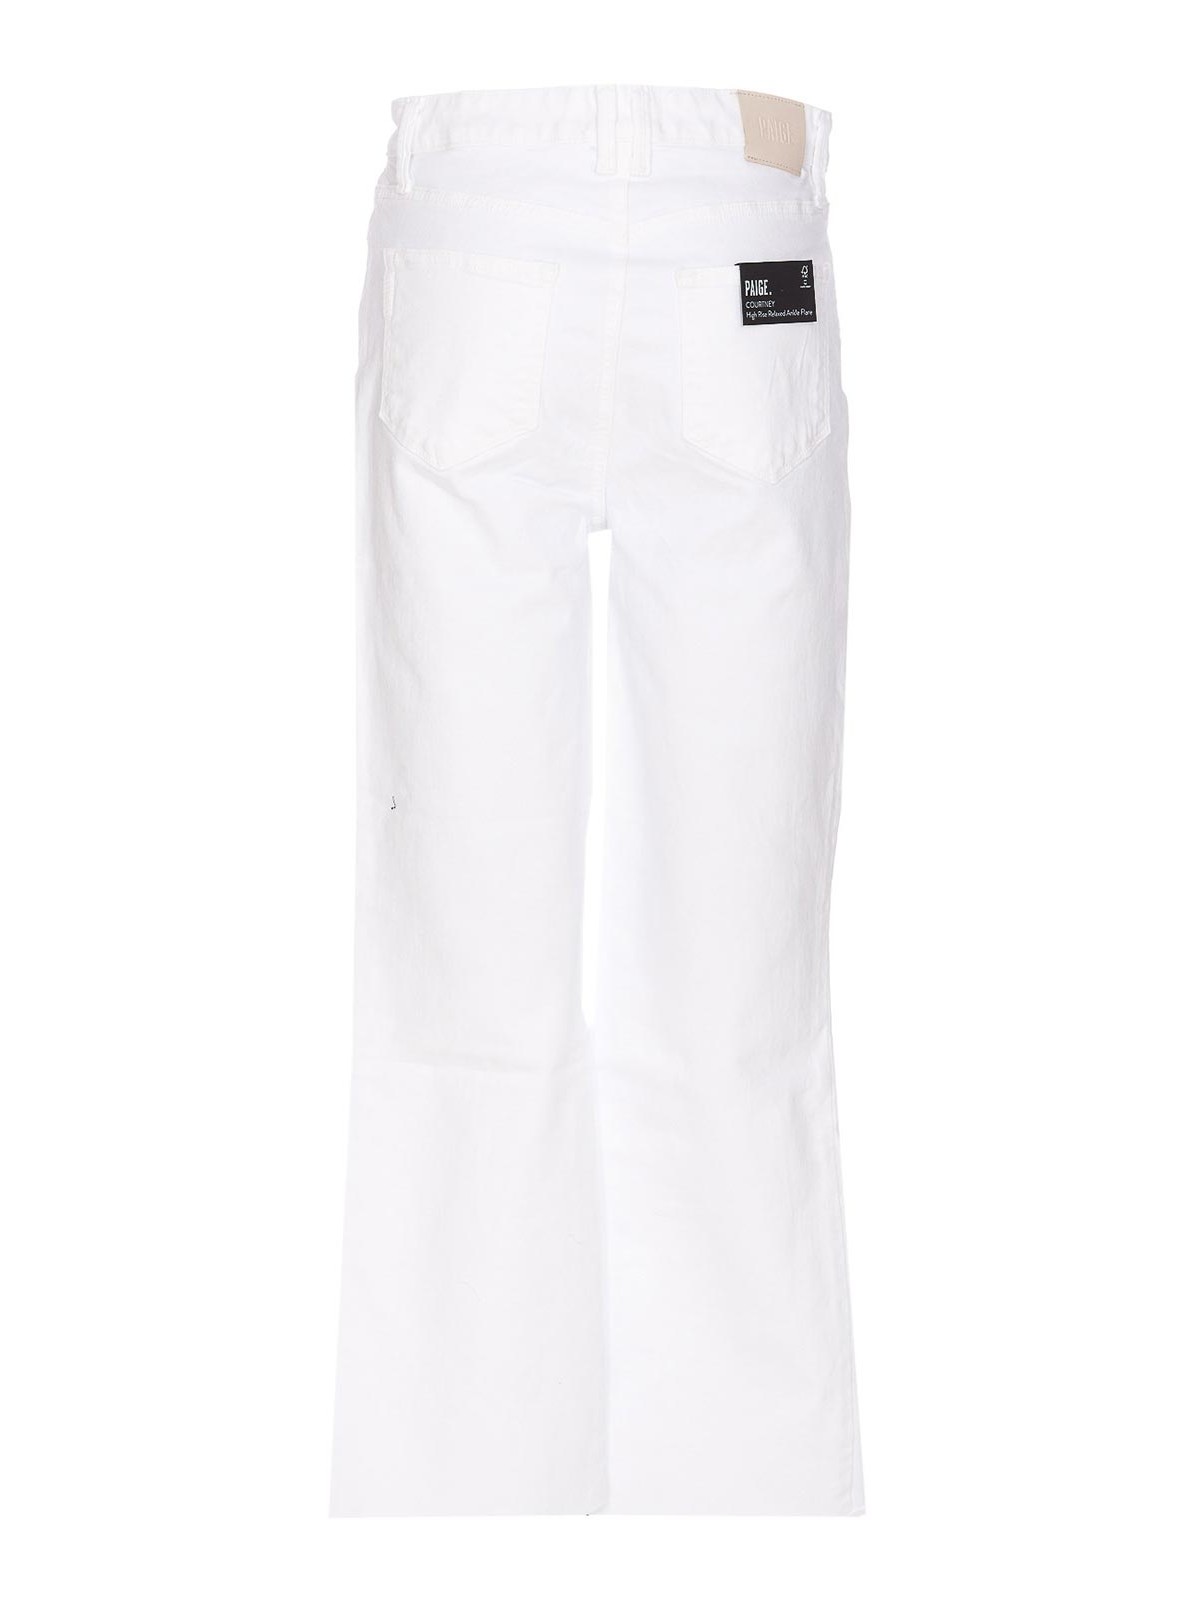 Shop Paige Courtney Pants In White